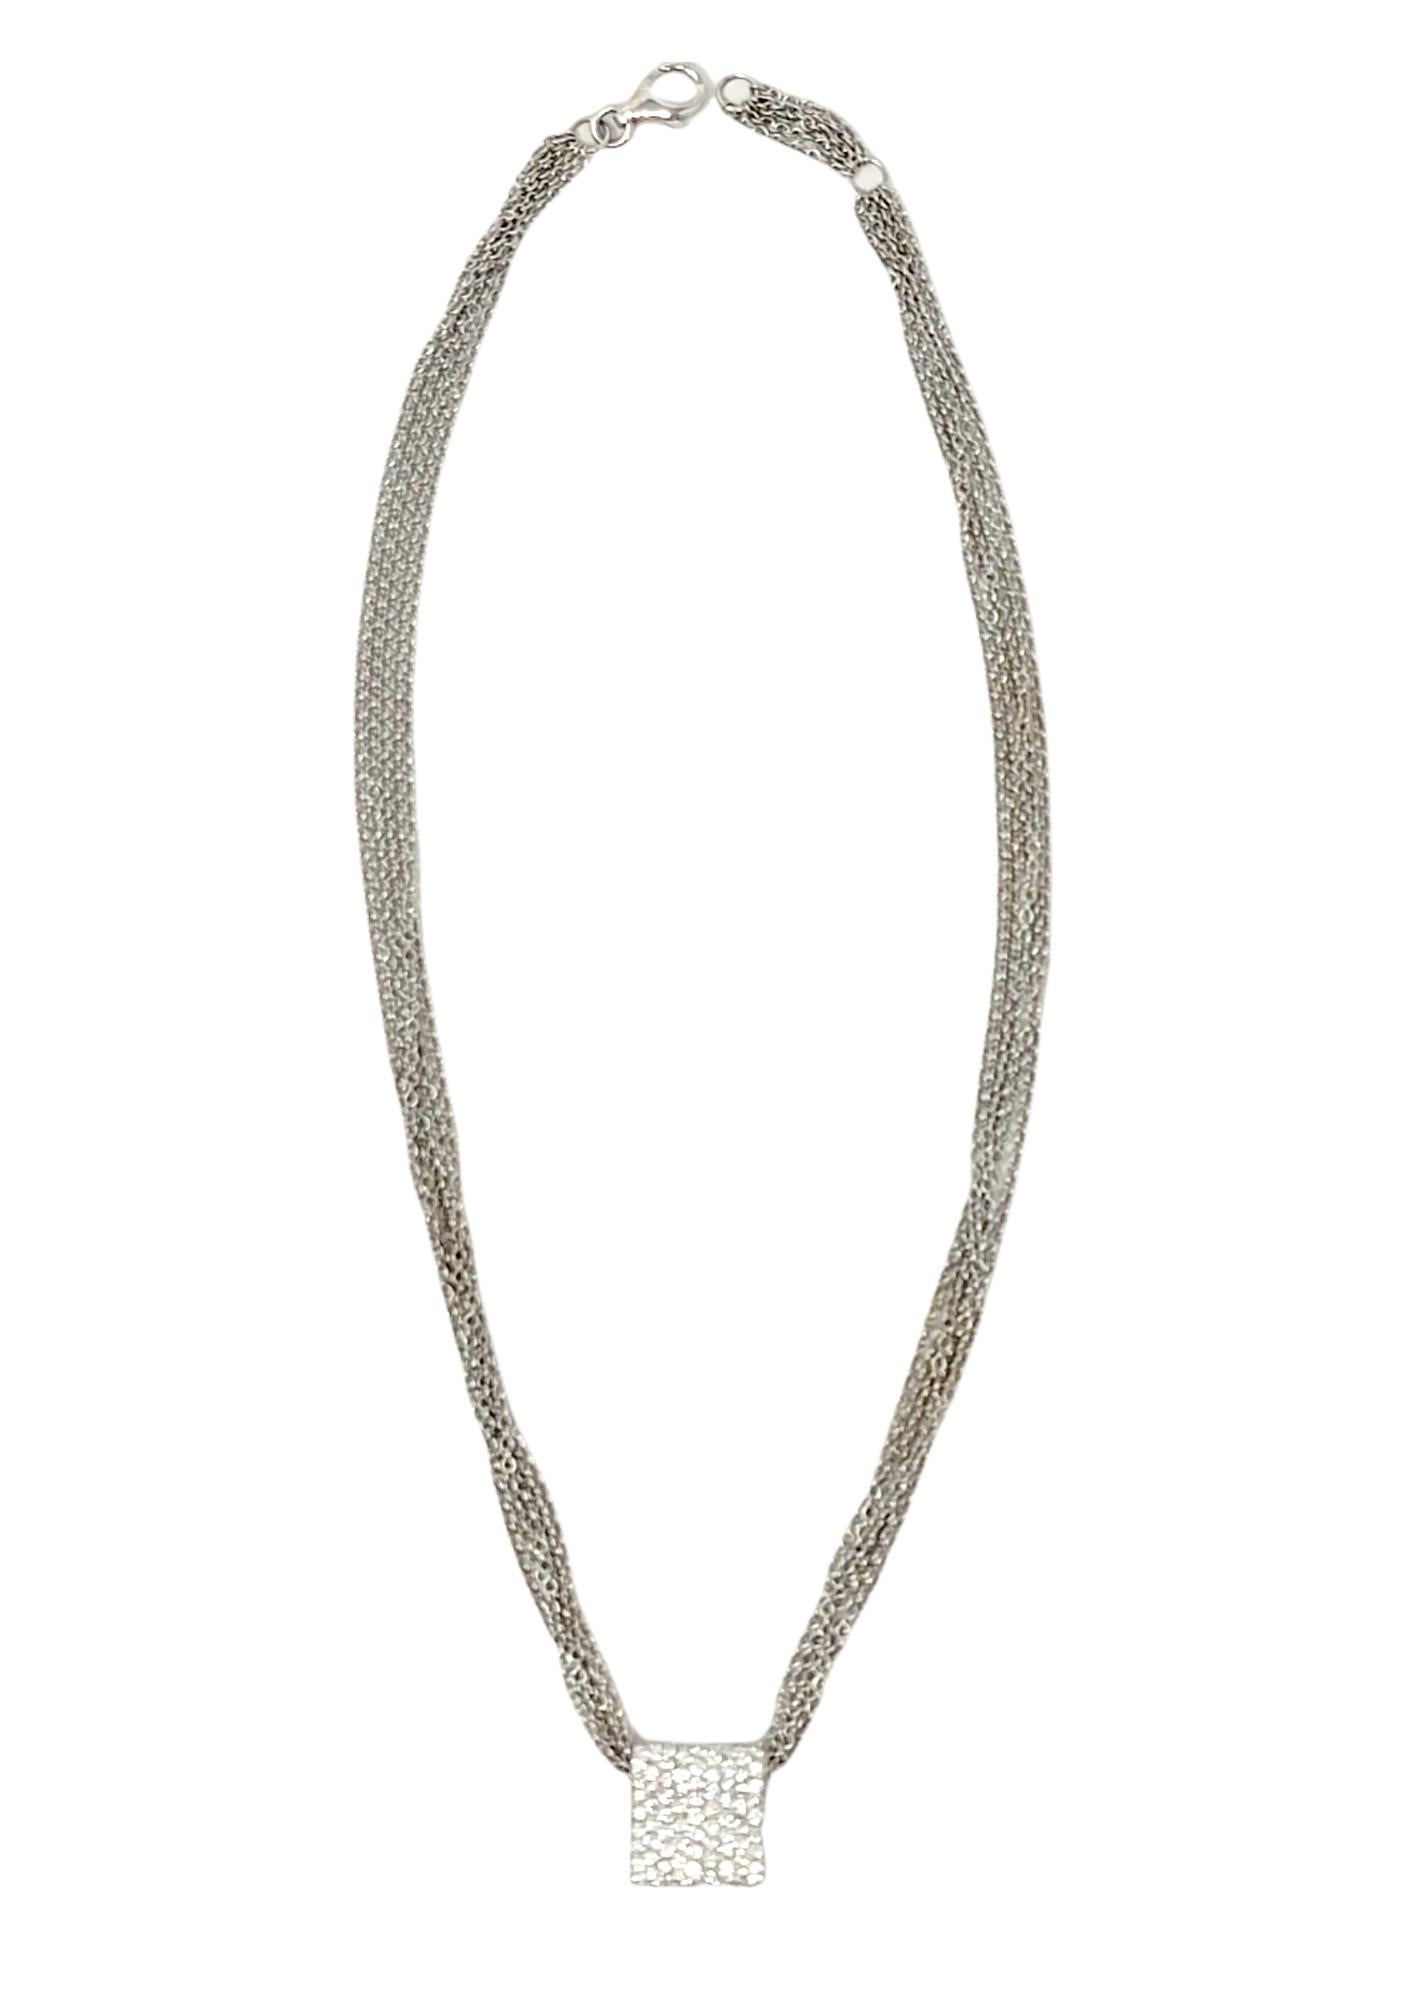 Luca Carati Pave Diamond 5 Strand Chain Pendant Necklace in 18 White Karat Gold In Good Condition For Sale In Scottsdale, AZ